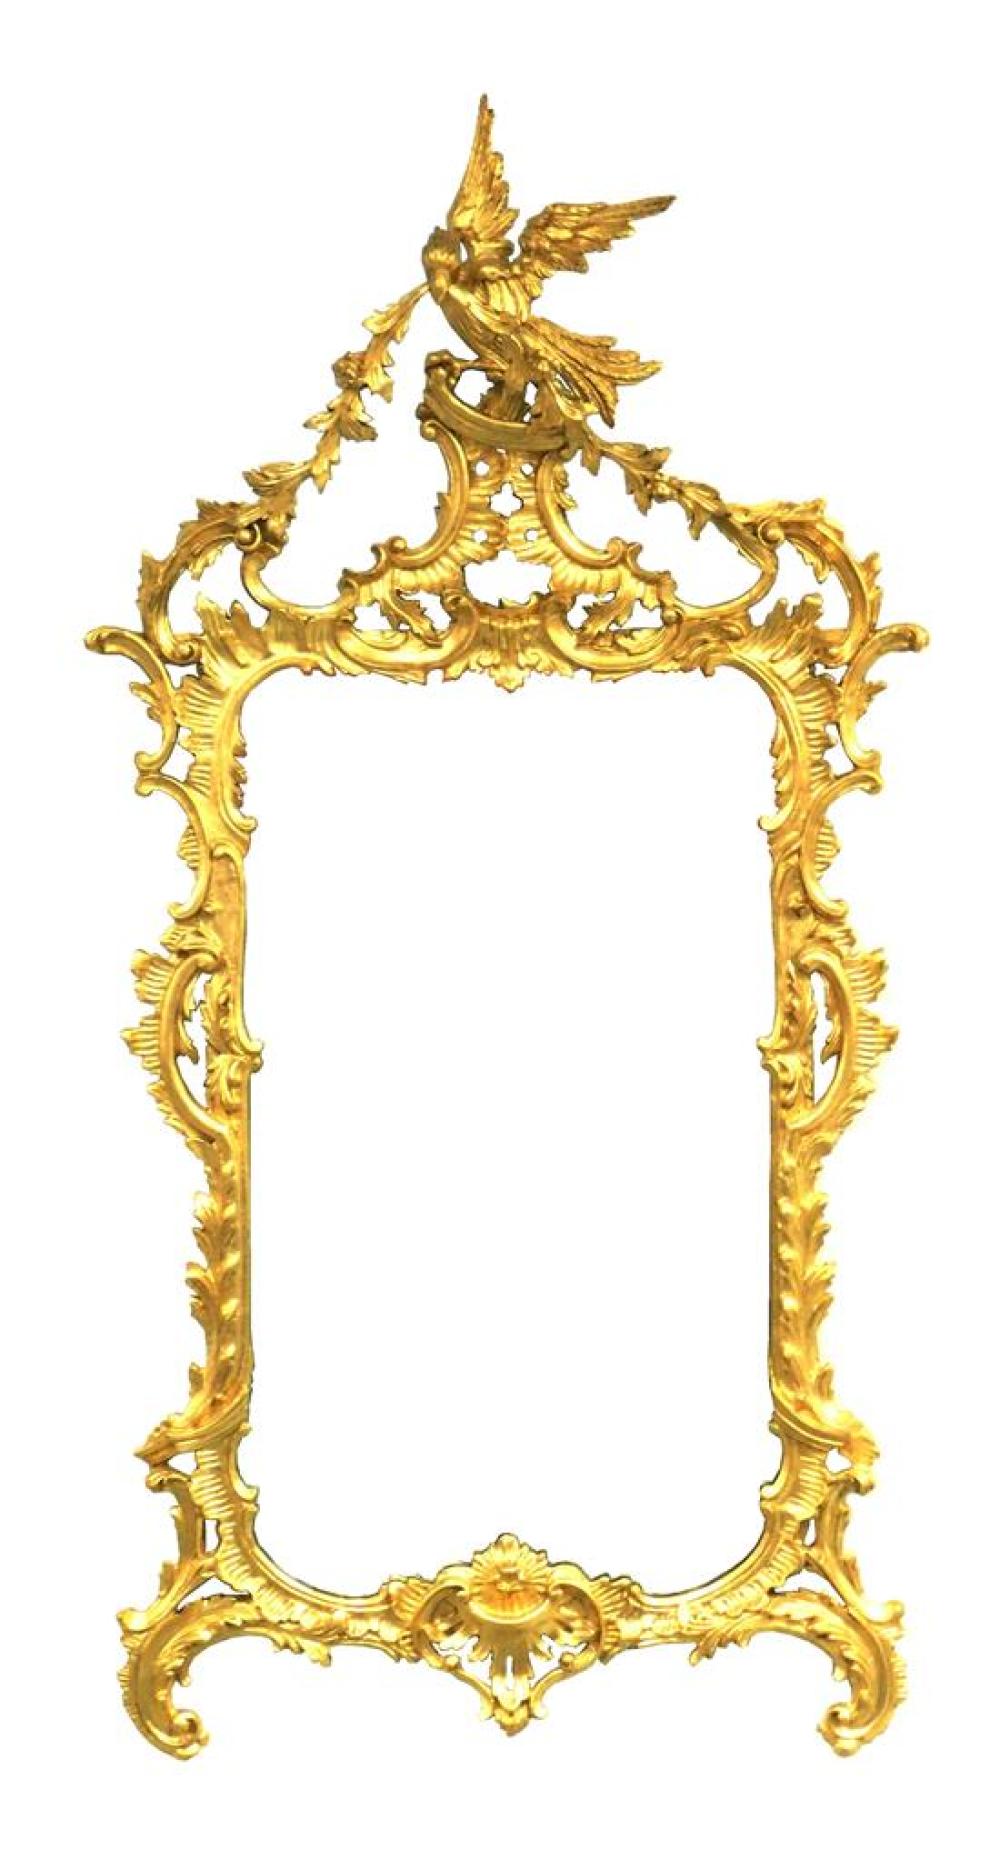 ROCOCO STYLE GILDED WALL MIRROR  31cd0a